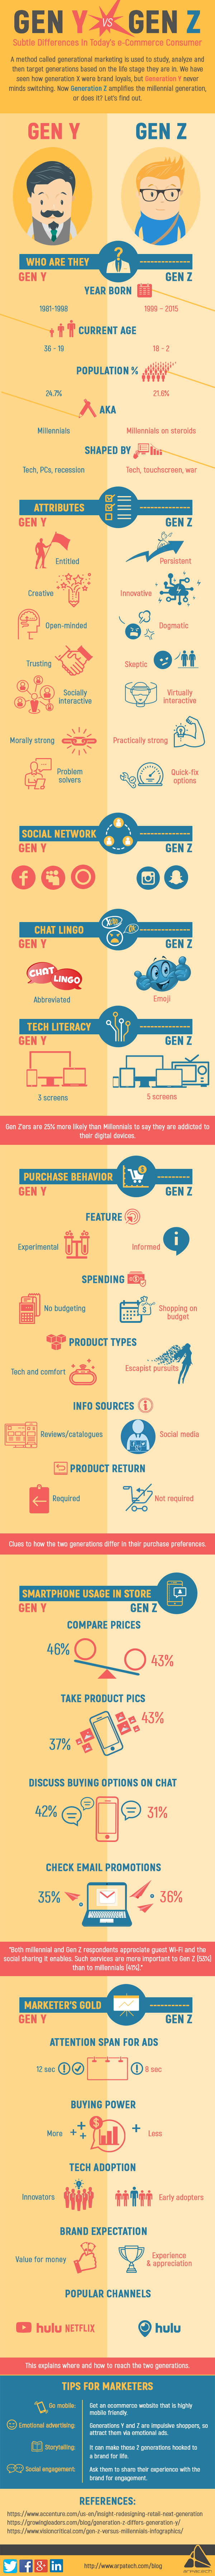 Subtle Differences Between Today’s e-Commerce Consumers